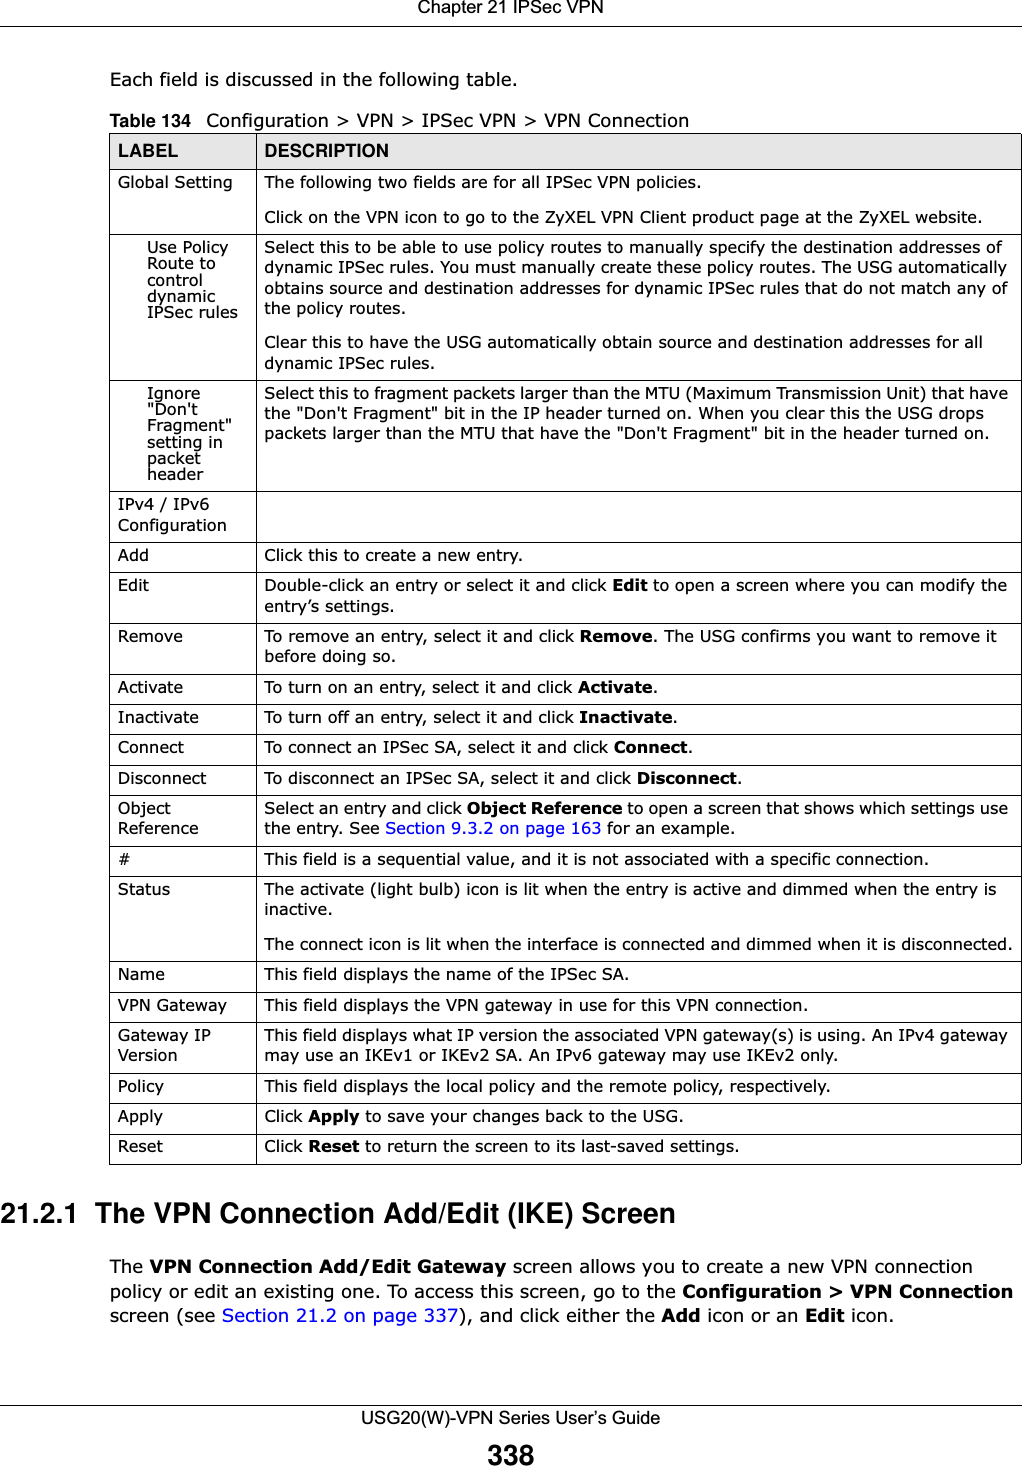 Chapter 21 IPSec VPNUSG20(W)-VPN Series User’s Guide338Each field is discussed in the following table.   21.2.1  The VPN Connection Add/Edit (IKE) ScreenThe VPN Connection Add/Edit Gateway screen allows you to create a new VPN connection policy or edit an existing one. To access this screen, go to the Configuration &gt; VPN Connection screen (see Section 21.2 on page 337), and click either the Add icon or an Edit icon. Table 134   Configuration &gt; VPN &gt; IPSec VPN &gt; VPN ConnectionLABEL DESCRIPTIONGlobal Setting The following two fields are for all IPSec VPN policies. Click on the VPN icon to go to the ZyXEL VPN Client product page at the ZyXEL website.Use Policy Route to control dynamic IPSec rulesSelect this to be able to use policy routes to manually specify the destination addresses of dynamic IPSec rules. You must manually create these policy routes. The USG automatically obtains source and destination addresses for dynamic IPSec rules that do not match any of the policy routes. Clear this to have the USG automatically obtain source and destination addresses for all dynamic IPSec rules.Ignore &quot;Don&apos;t Fragment&quot; setting in packet headerSelect this to fragment packets larger than the MTU (Maximum Transmission Unit) that have the &quot;Don&apos;t Fragment&quot; bit in the IP header turned on. When you clear this the USG drops packets larger than the MTU that have the &quot;Don&apos;t Fragment&quot; bit in the header turned on.IPv4 / IPv6 ConfigurationAdd Click this to create a new entry.Edit Double-click an entry or select it and click Edit to open a screen where you can modify the entry’s settings. Remove To remove an entry, select it and click Remove. The USG confirms you want to remove it before doing so.Activate To turn on an entry, select it and click Activate.Inactivate To turn off an entry, select it and click Inactivate.Connect To connect an IPSec SA, select it and click Connect.Disconnect To disconnect an IPSec SA, select it and click Disconnect.Object ReferenceSelect an entry and click Object Reference to open a screen that shows which settings use the entry. See Section 9.3.2 on page 163 for an example.# This field is a sequential value, and it is not associated with a specific connection.Status The activate (light bulb) icon is lit when the entry is active and dimmed when the entry is inactive.The connect icon is lit when the interface is connected and dimmed when it is disconnected.Name This field displays the name of the IPSec SA.VPN Gateway This field displays the VPN gateway in use for this VPN connection. Gateway IP VersionThis field displays what IP version the associated VPN gateway(s) is using. An IPv4 gateway may use an IKEv1 or IKEv2 SA. An IPv6 gateway may use IKEv2 only.Policy This field displays the local policy and the remote policy, respectively.Apply Click Apply to save your changes back to the USG.Reset Click Reset to return the screen to its last-saved settings. 